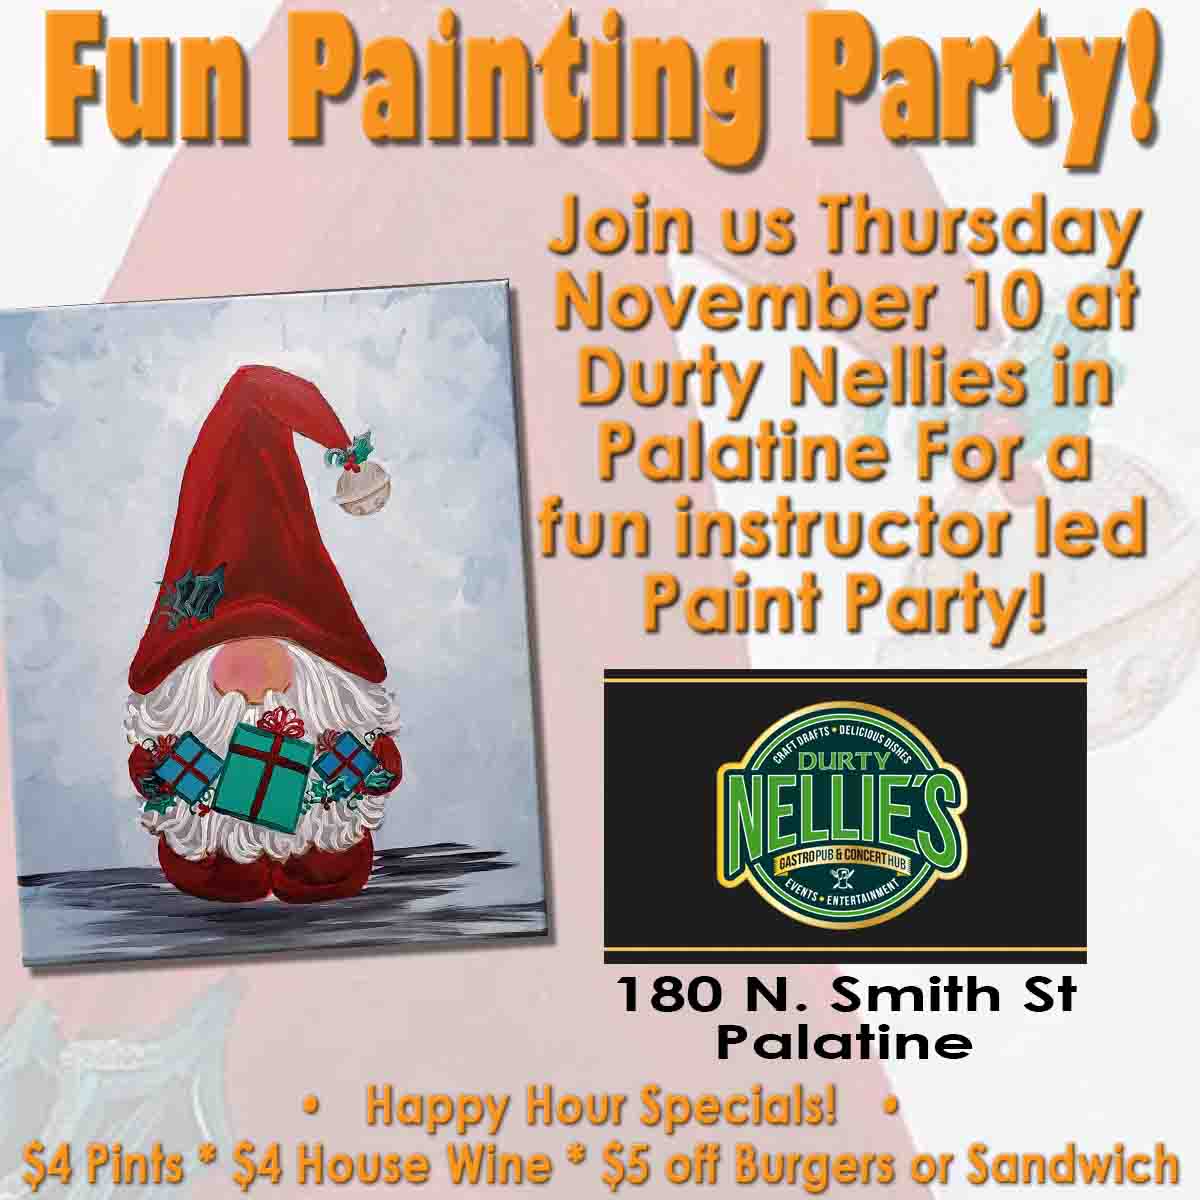 FESTIVE GNOME FUN PAINTING PARTY AT DURTY NELLIE'S 